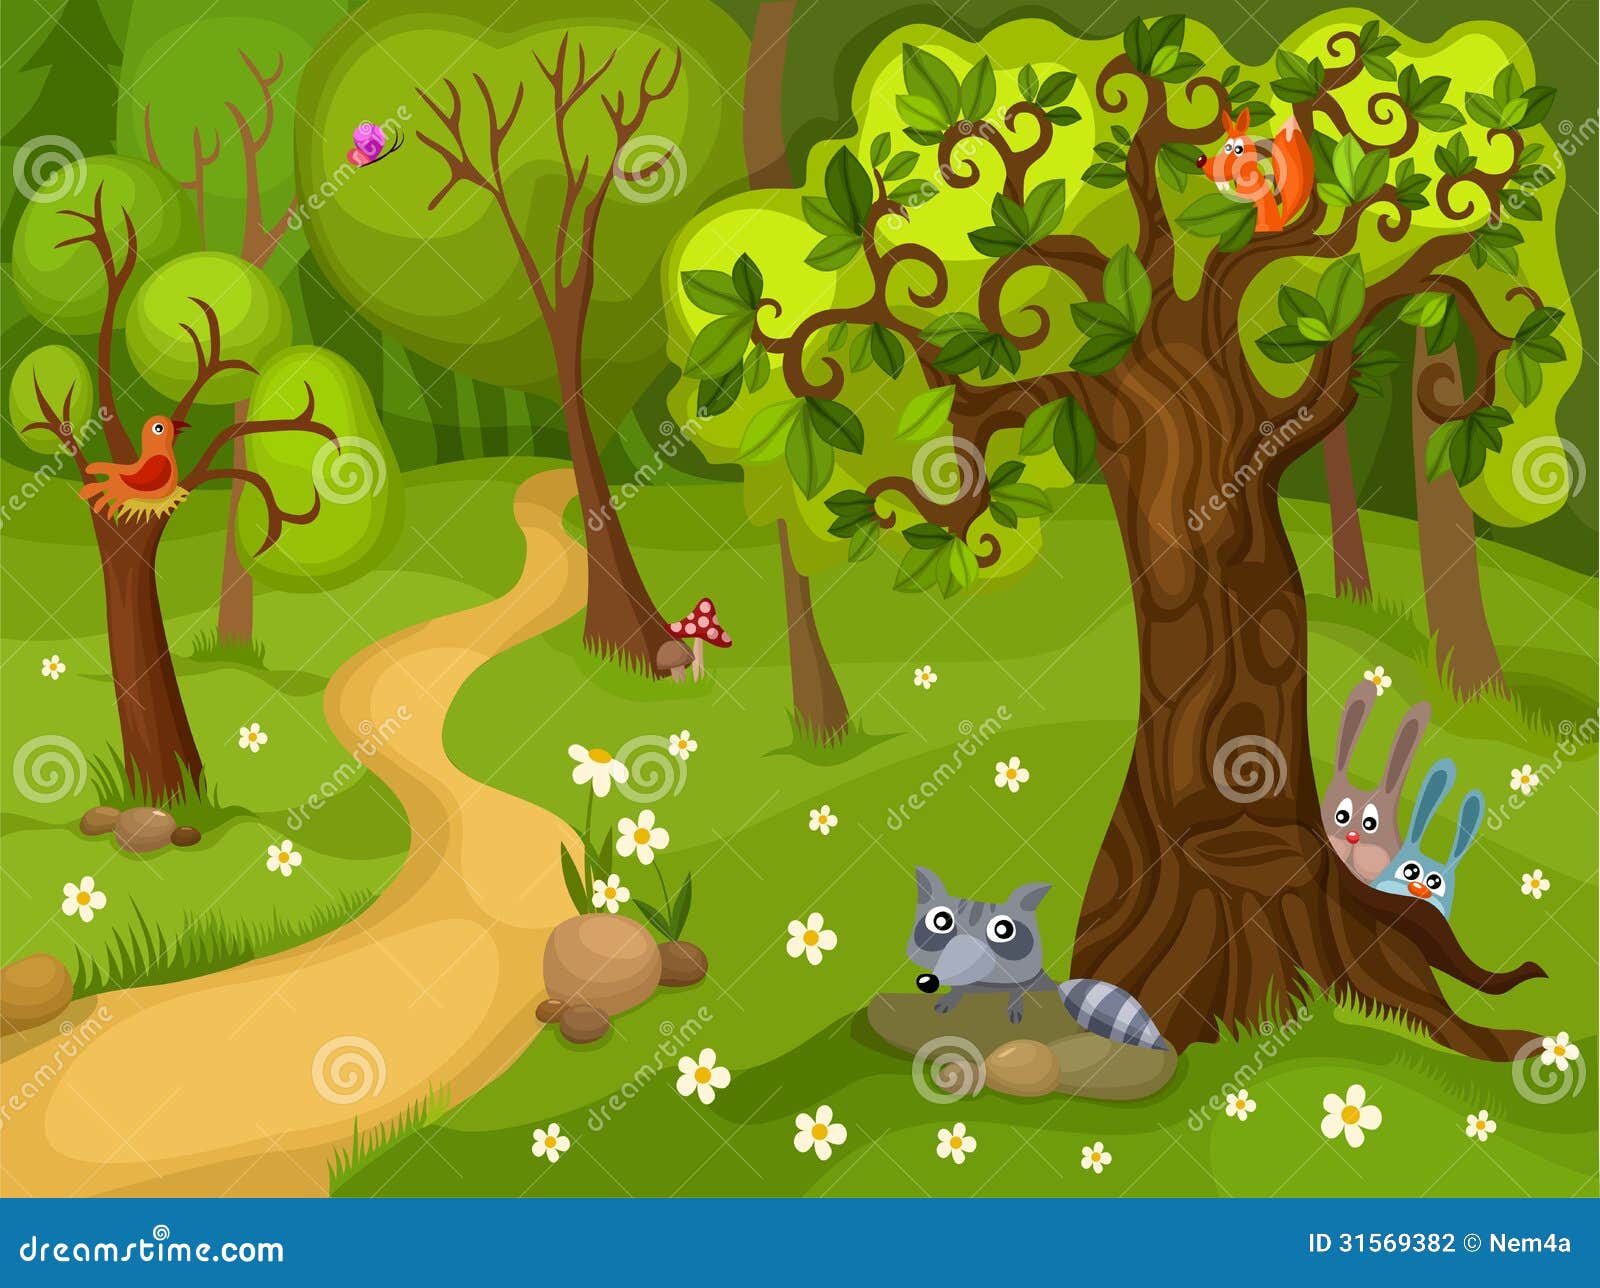 Illustration Of A Forest Background Stock Photography - Image: 31569382